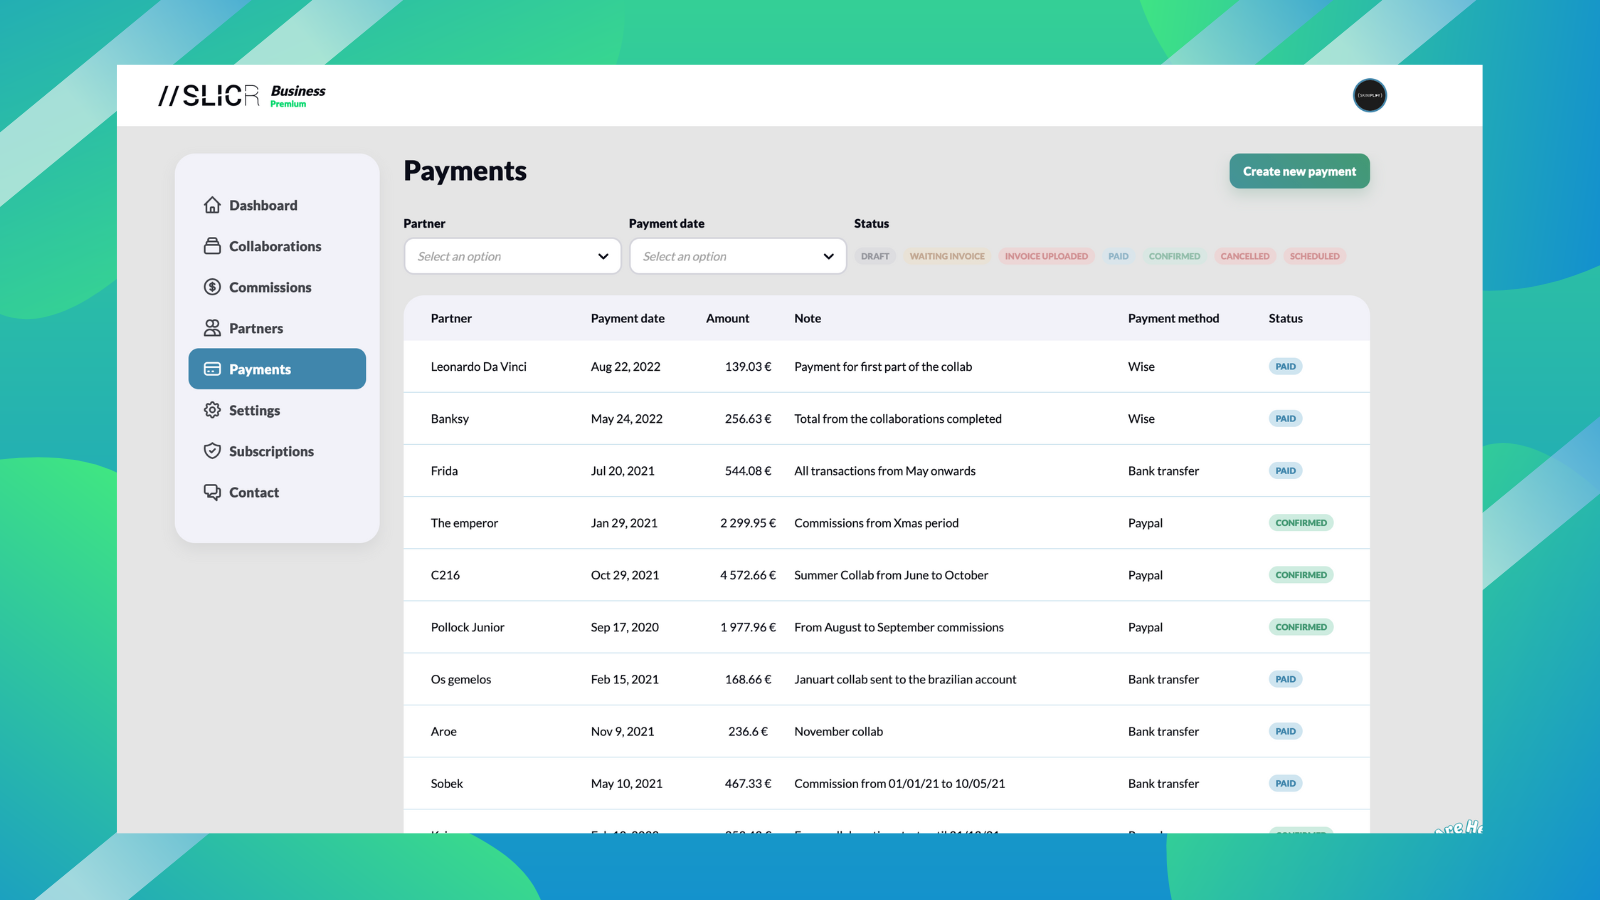 Request invoices and record payments automatically